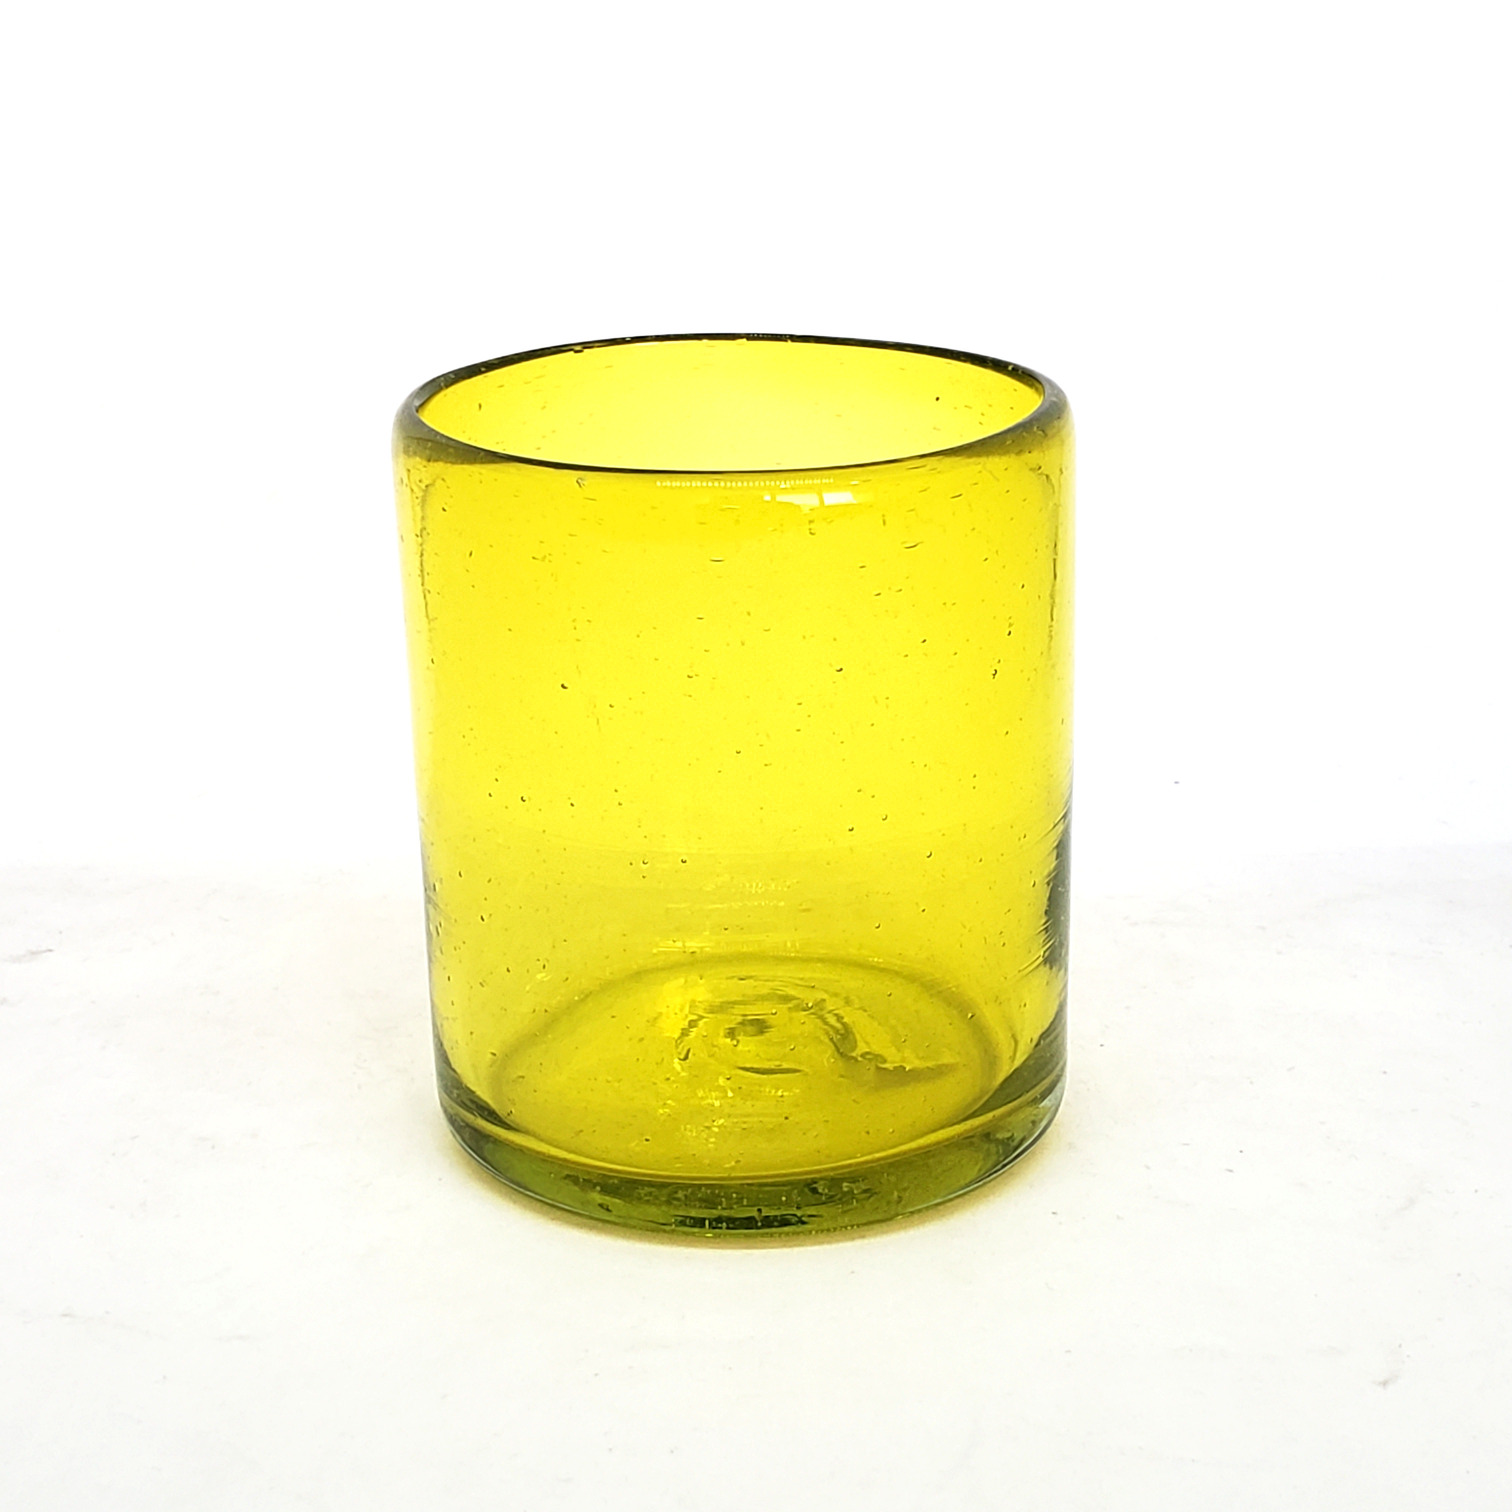 MEXICAN GLASSWARE / Solid Yellow 9 oz Short Tumblers (set of 6) / Enhance your favorite drink with these colorful handcrafted glasses.